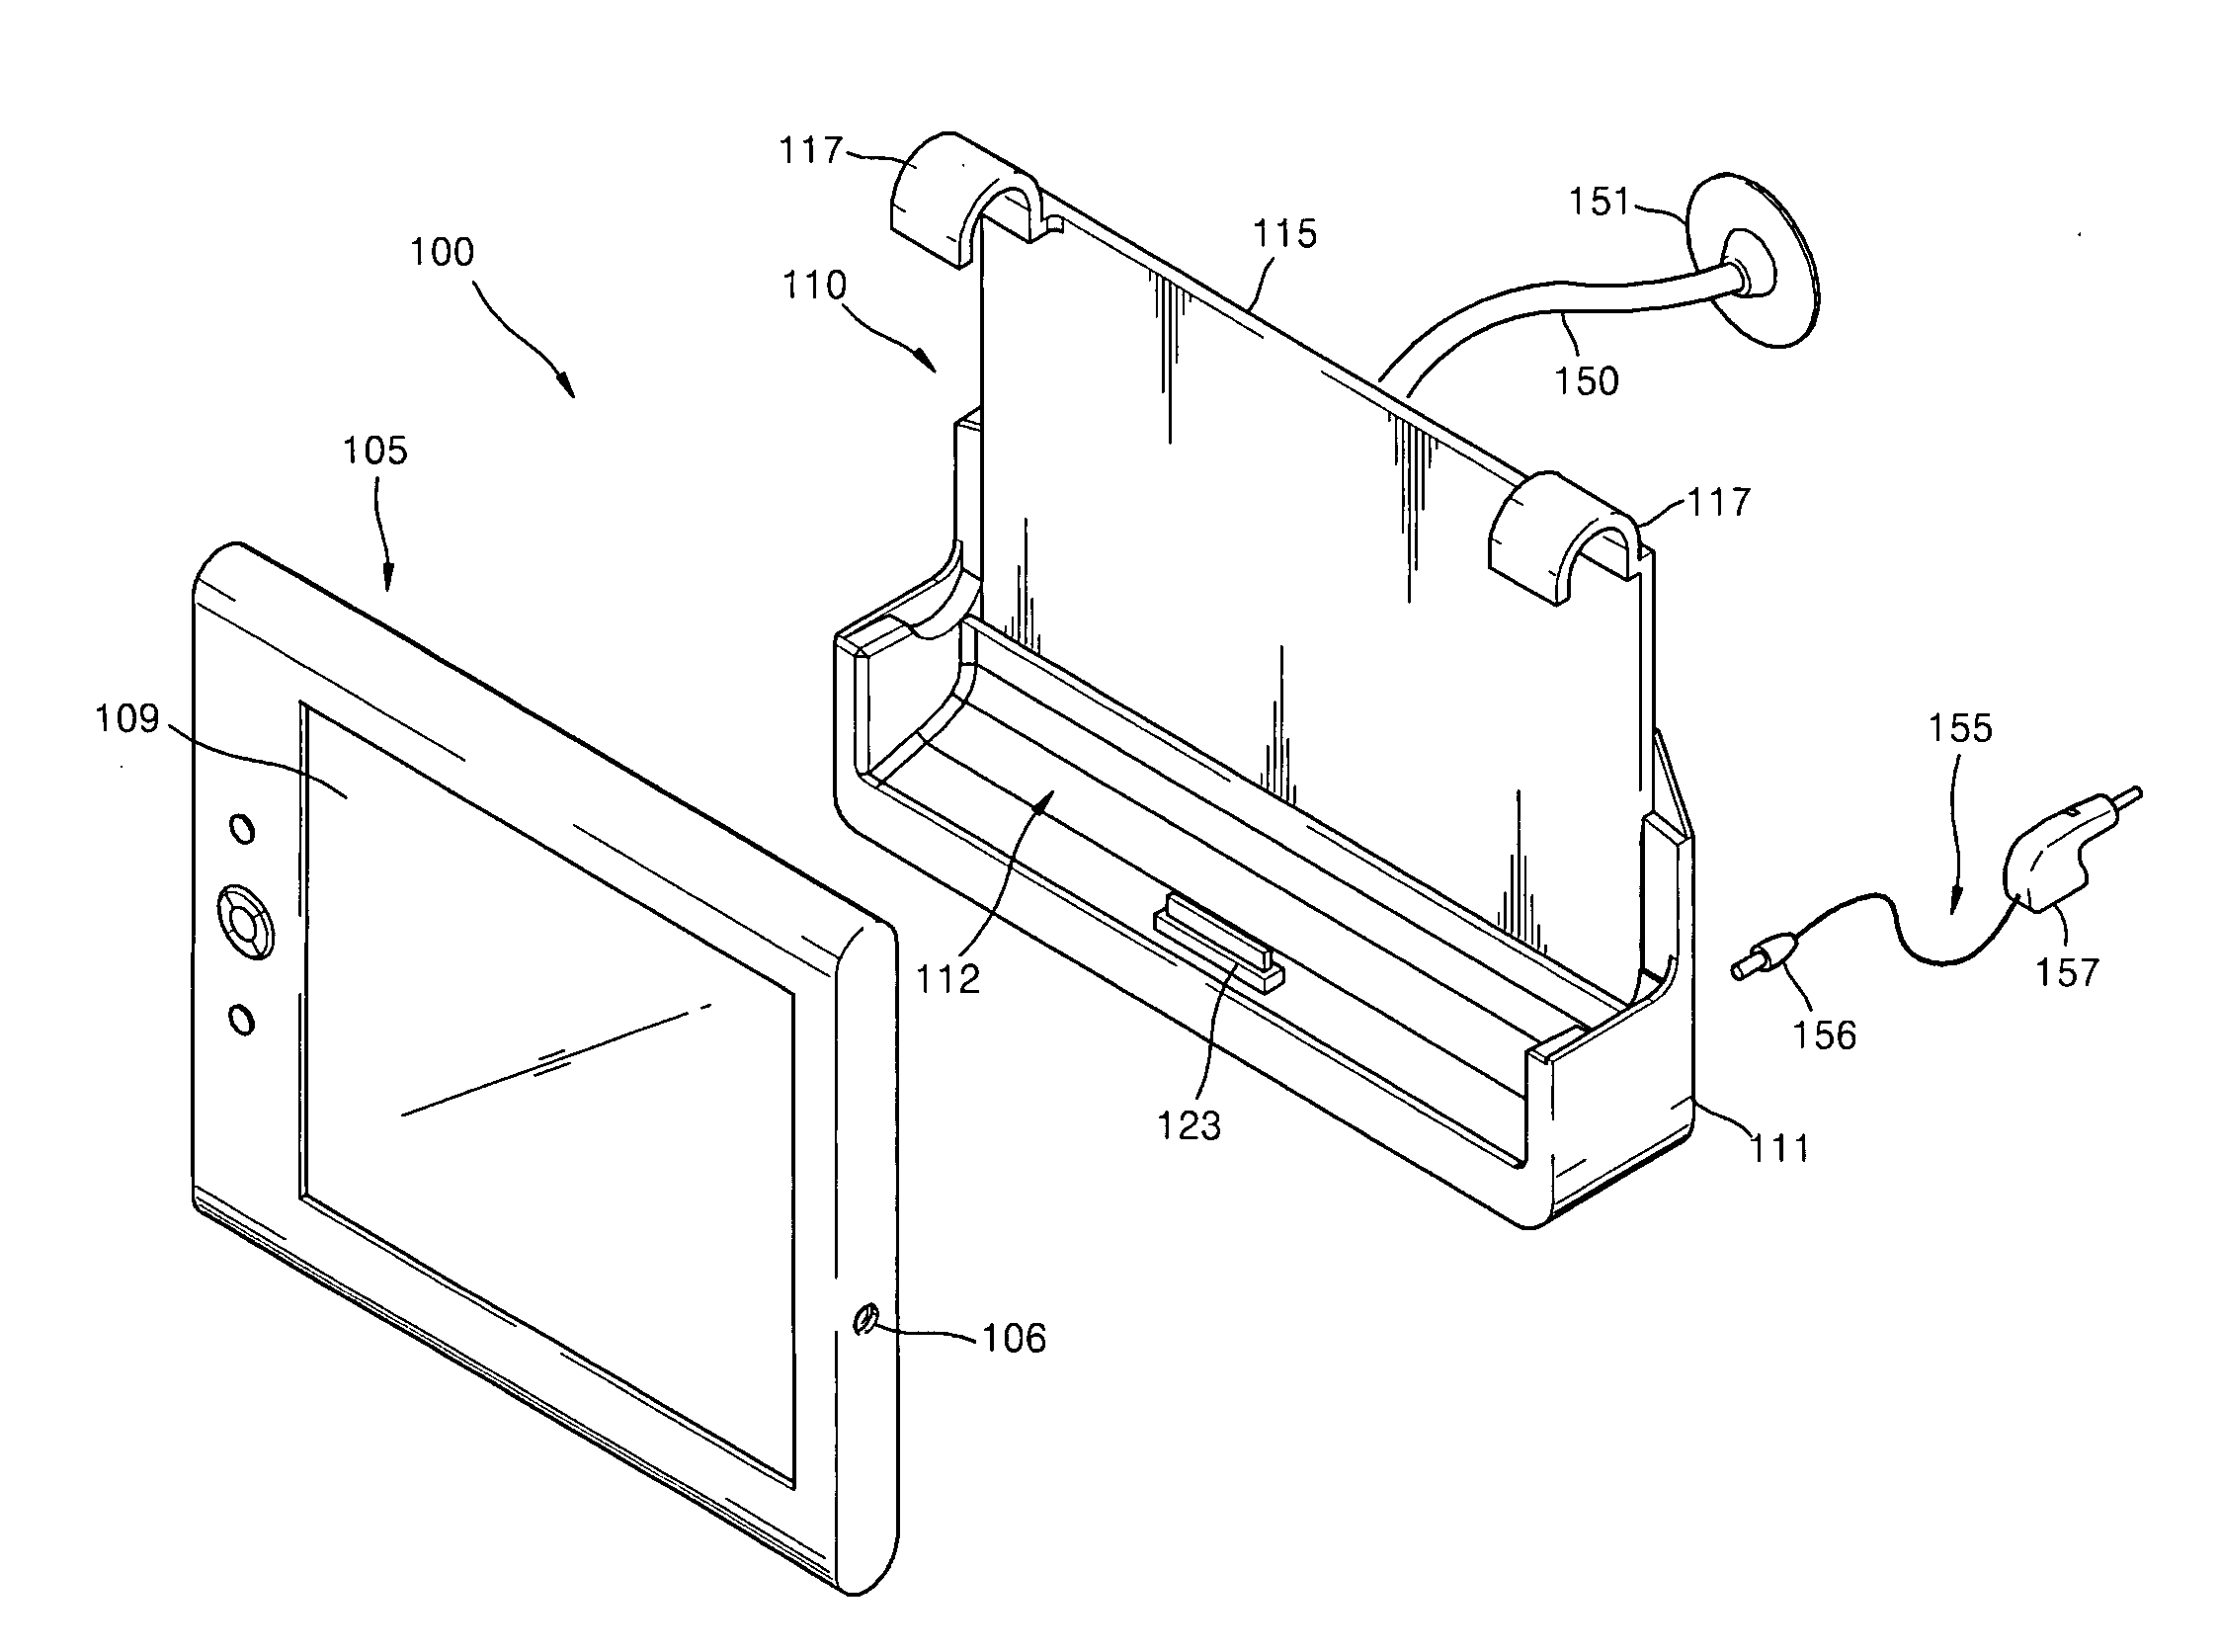 Cradle for use with a portable electronic appliance and a portable electronic appliance set including the cradle